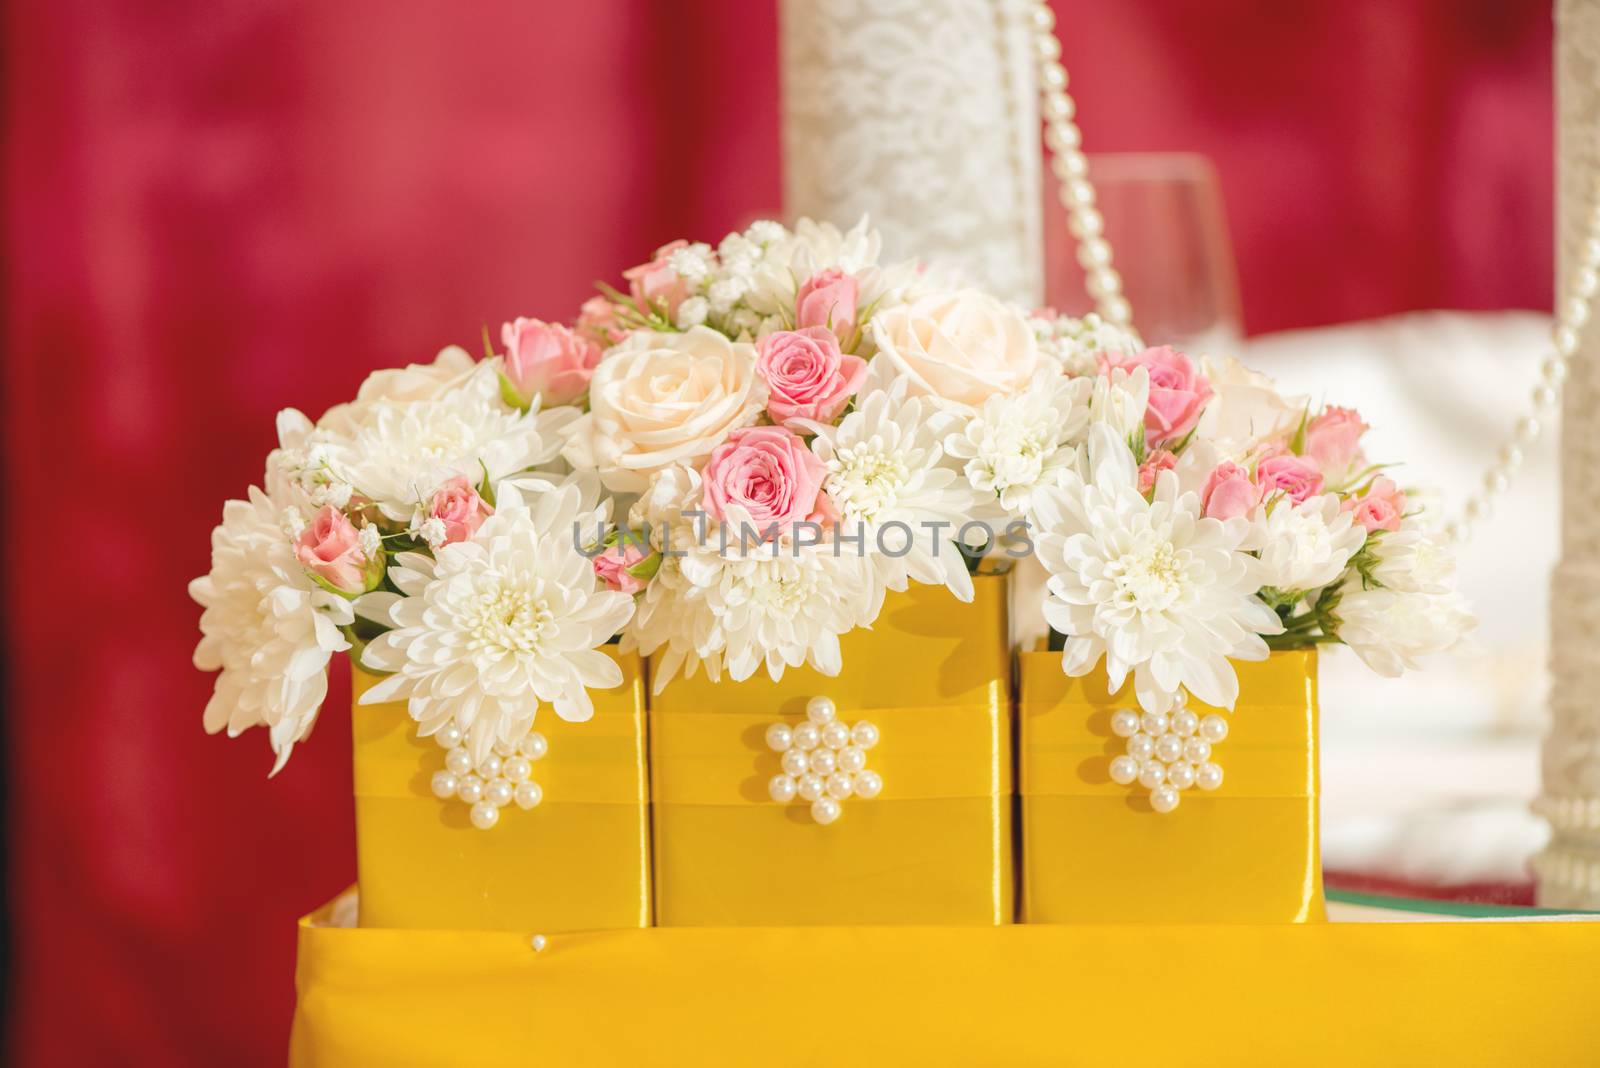 Close-up of a wedding table decoration with flowers